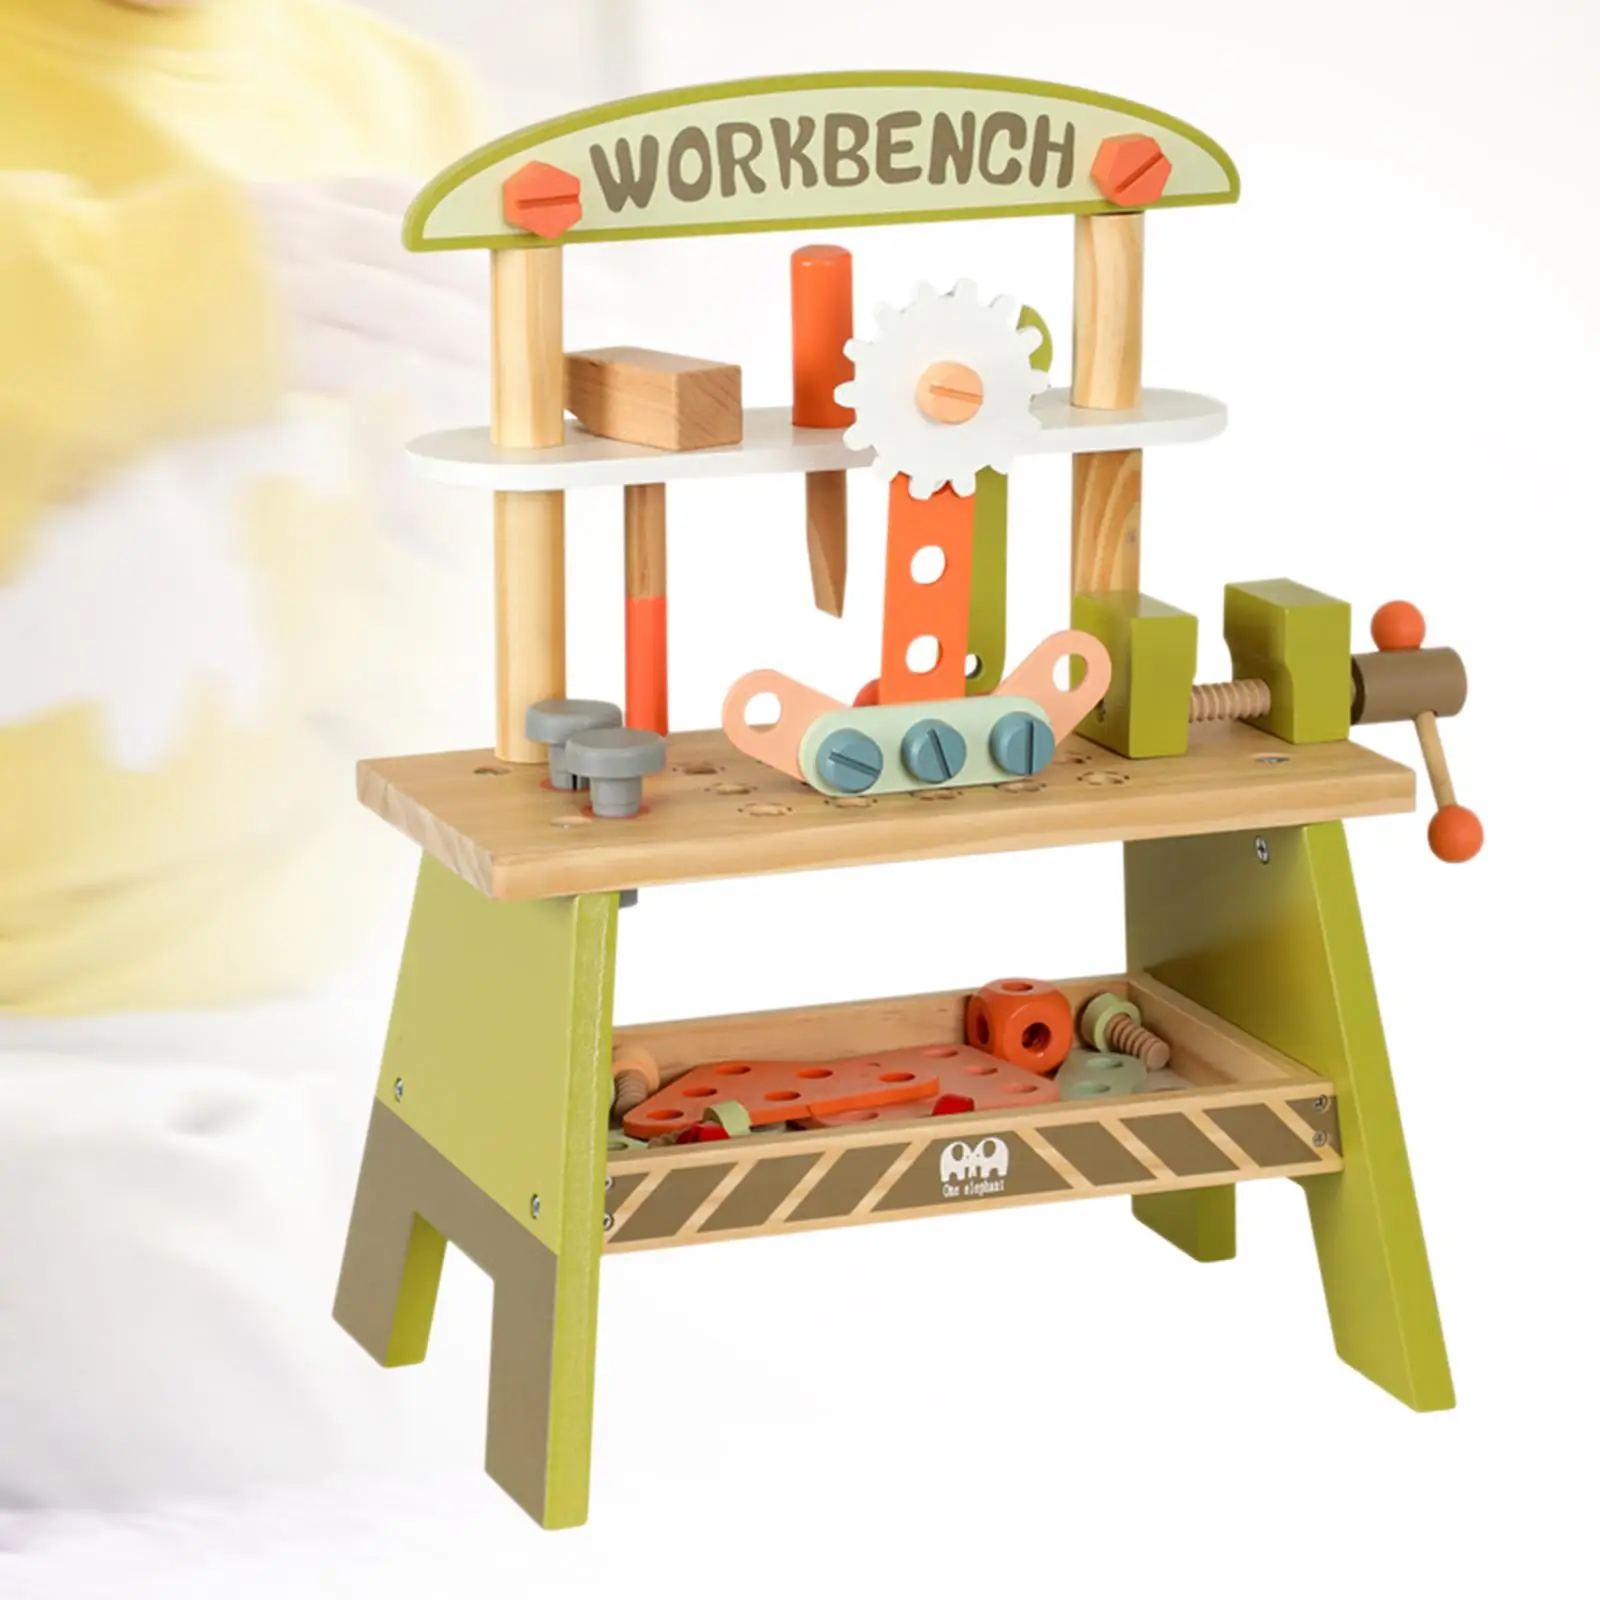 Pretend Play Construction Toy DIY Small Wooden Kid Workbench Toy for 2 3 4 5 Years Old Holiday Presents Child Christmas Gifts